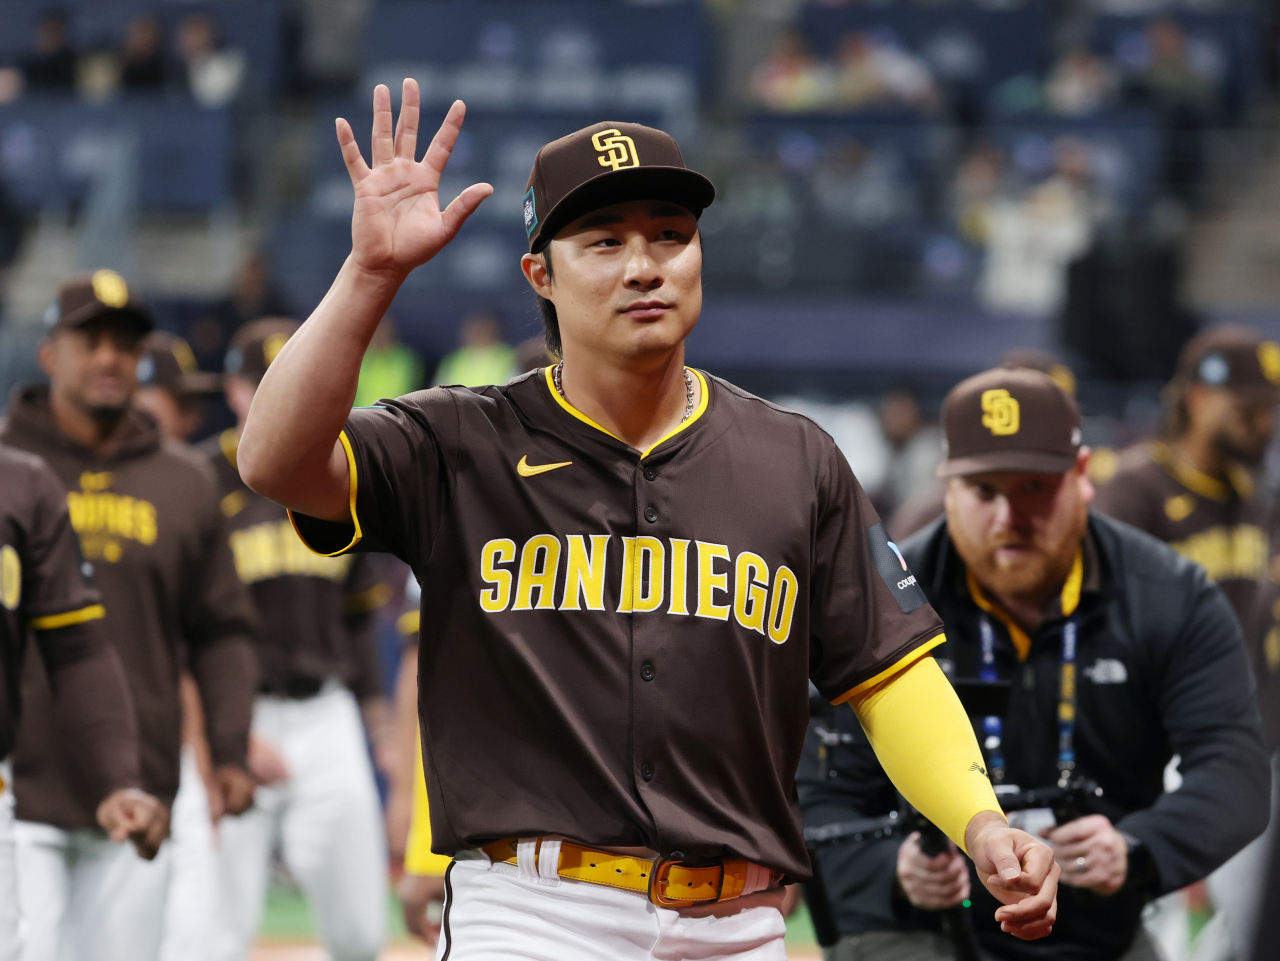 Kim Ha-seong of the San Diego Padres waves to fans before the start of an exhibition game against the South Korean national team at Gocheok Sky Dome in Seoul on Sunday. (Yonhap)